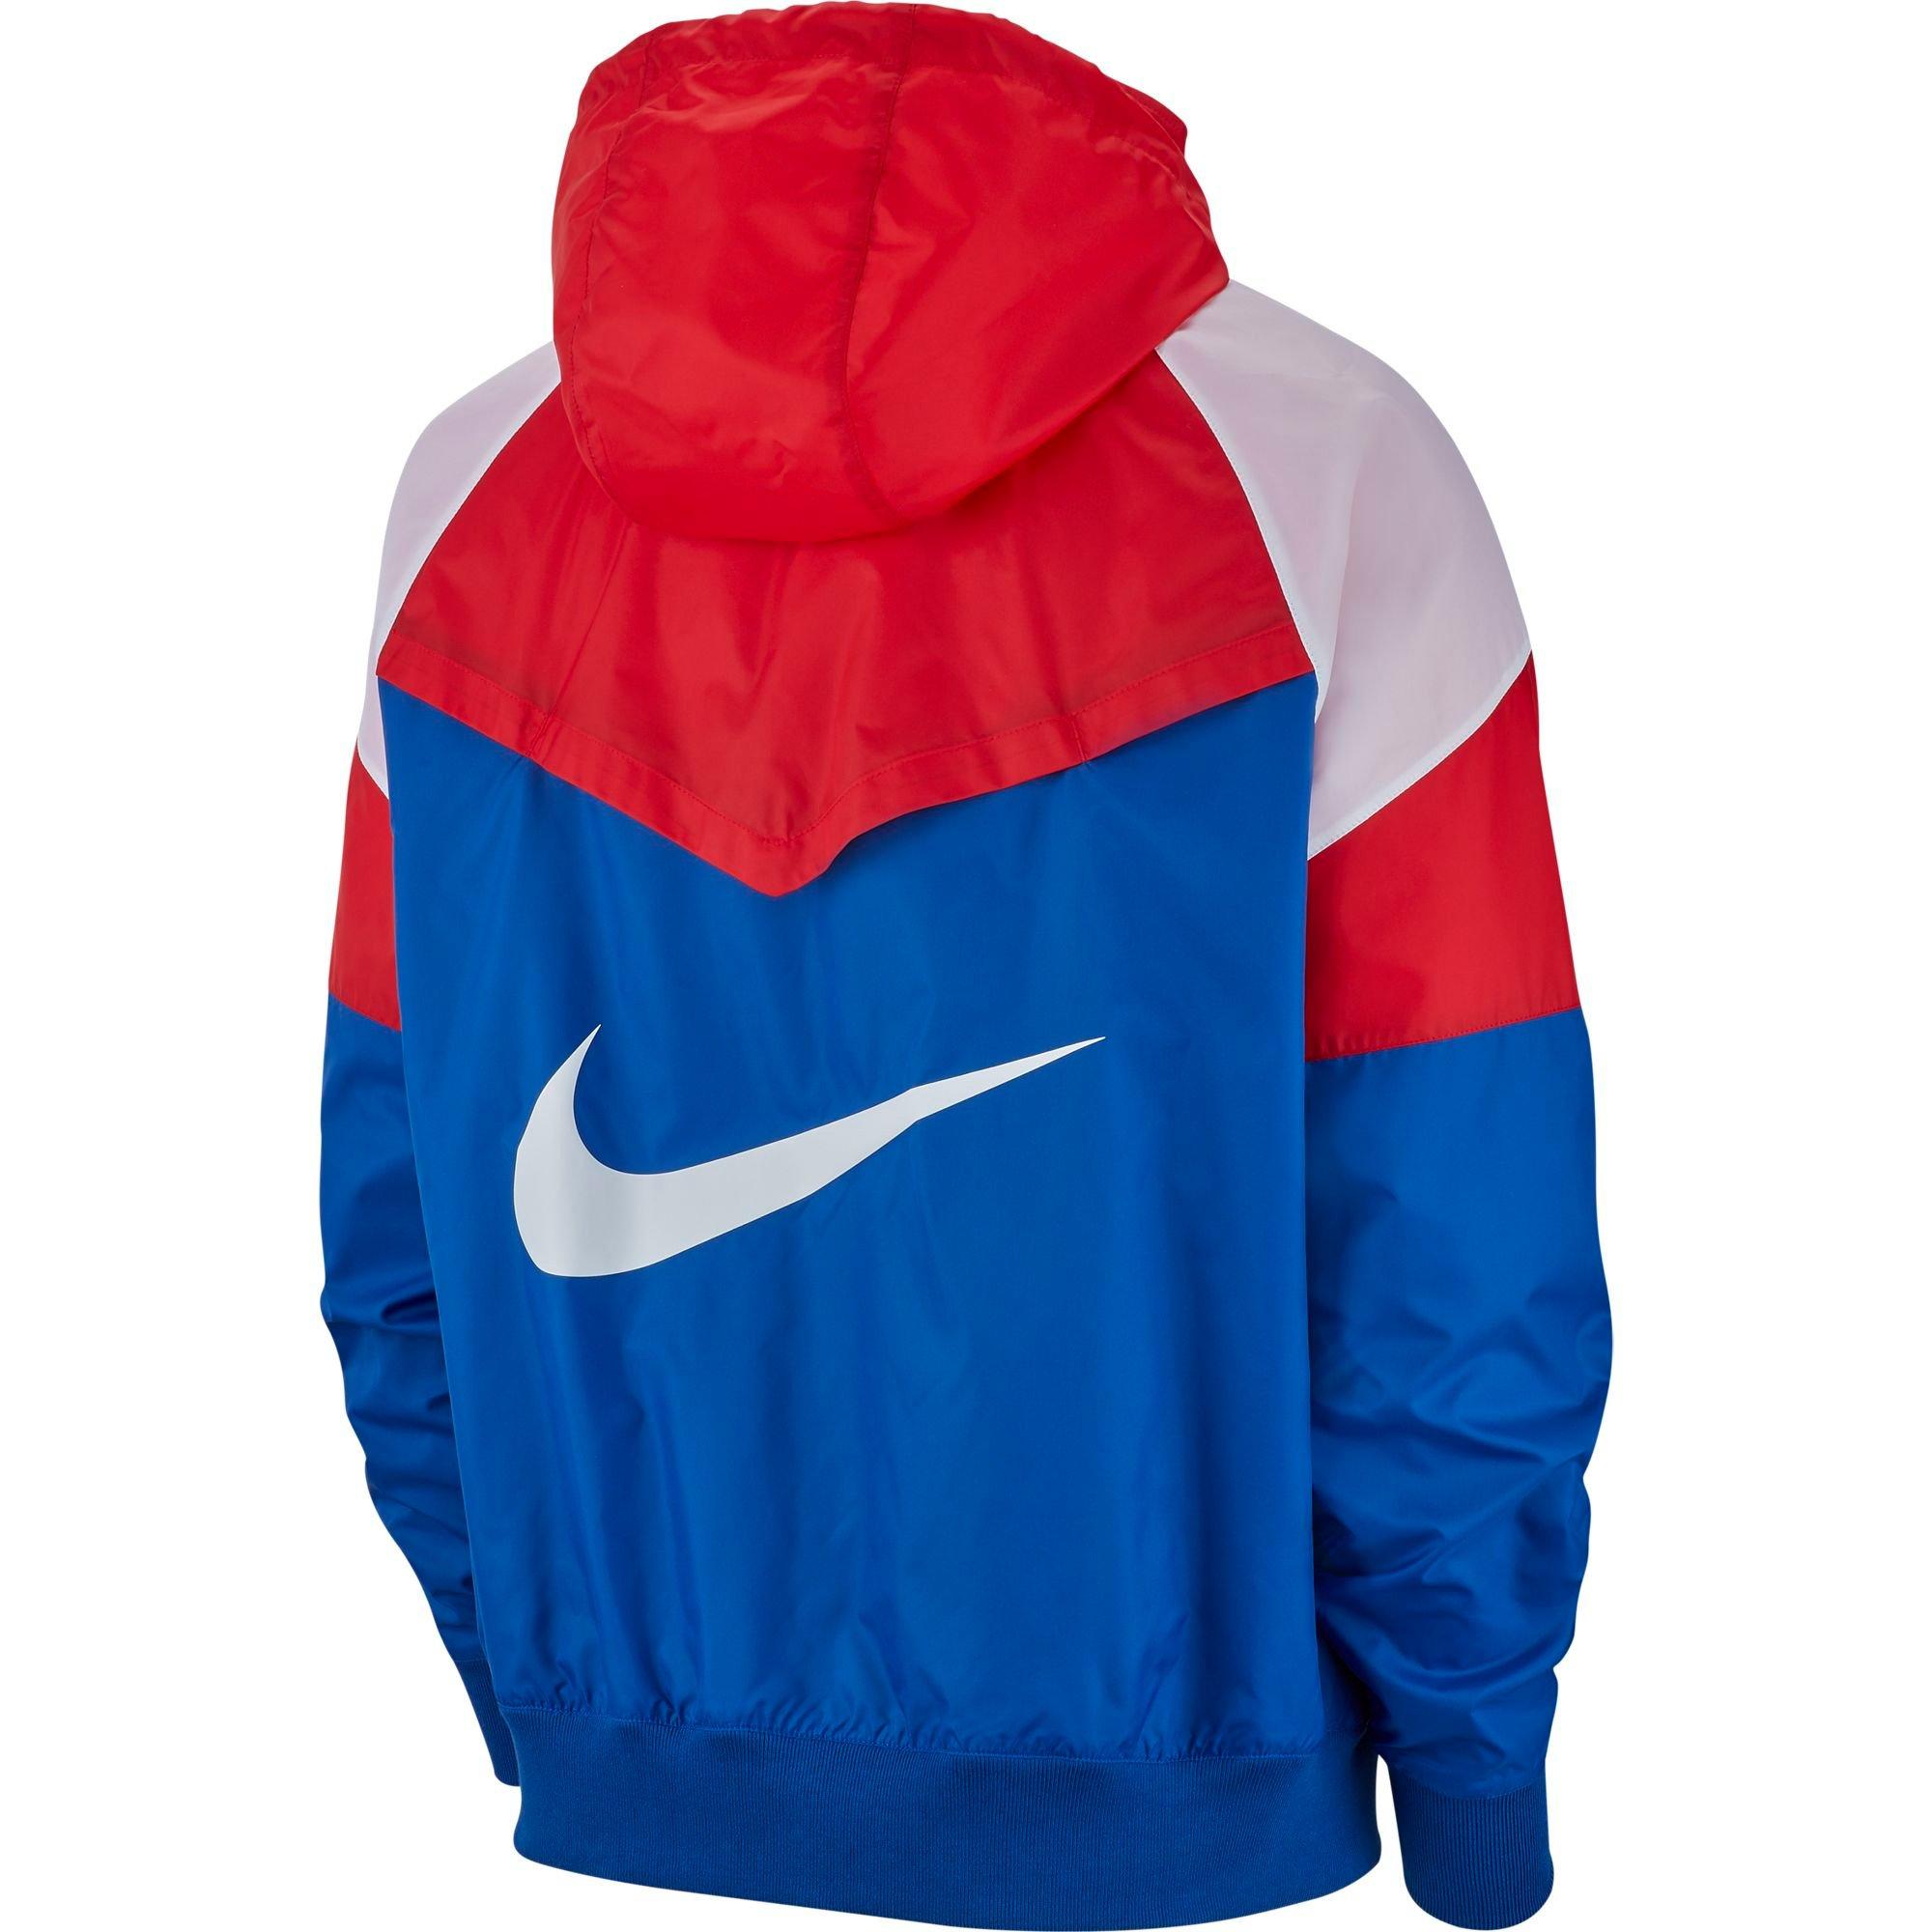 nike red white and blue jacket